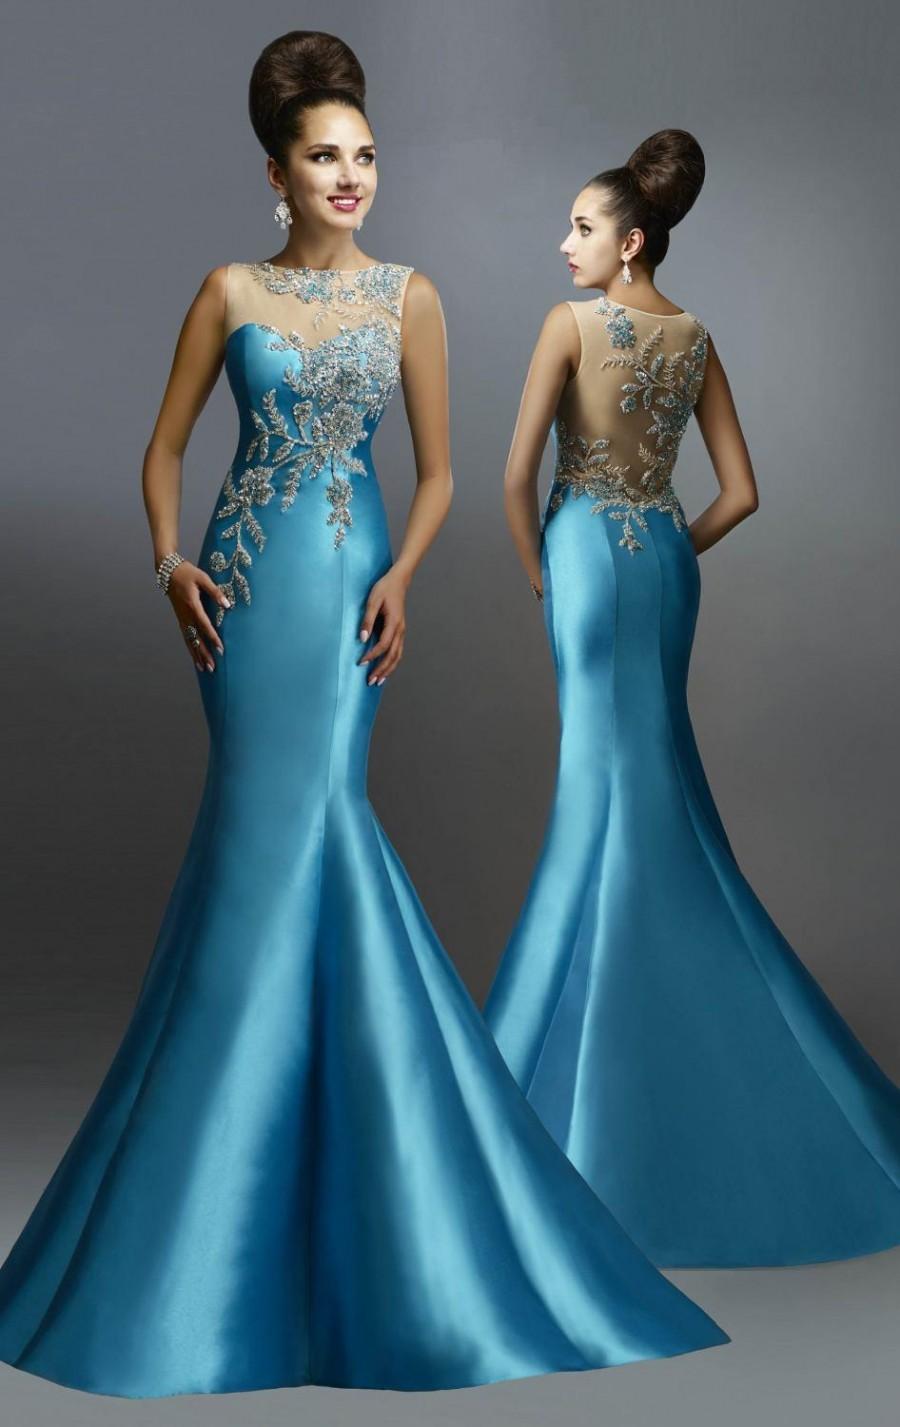 Свадьба - New Arrival 2015 Mermaid Evening Dresses With Beads Crystal Sheer Sexy Backless Pageant Gowns Party Formal Dresses Designer By Janique Online with $116.92/Piece on Hjklp88's Store 